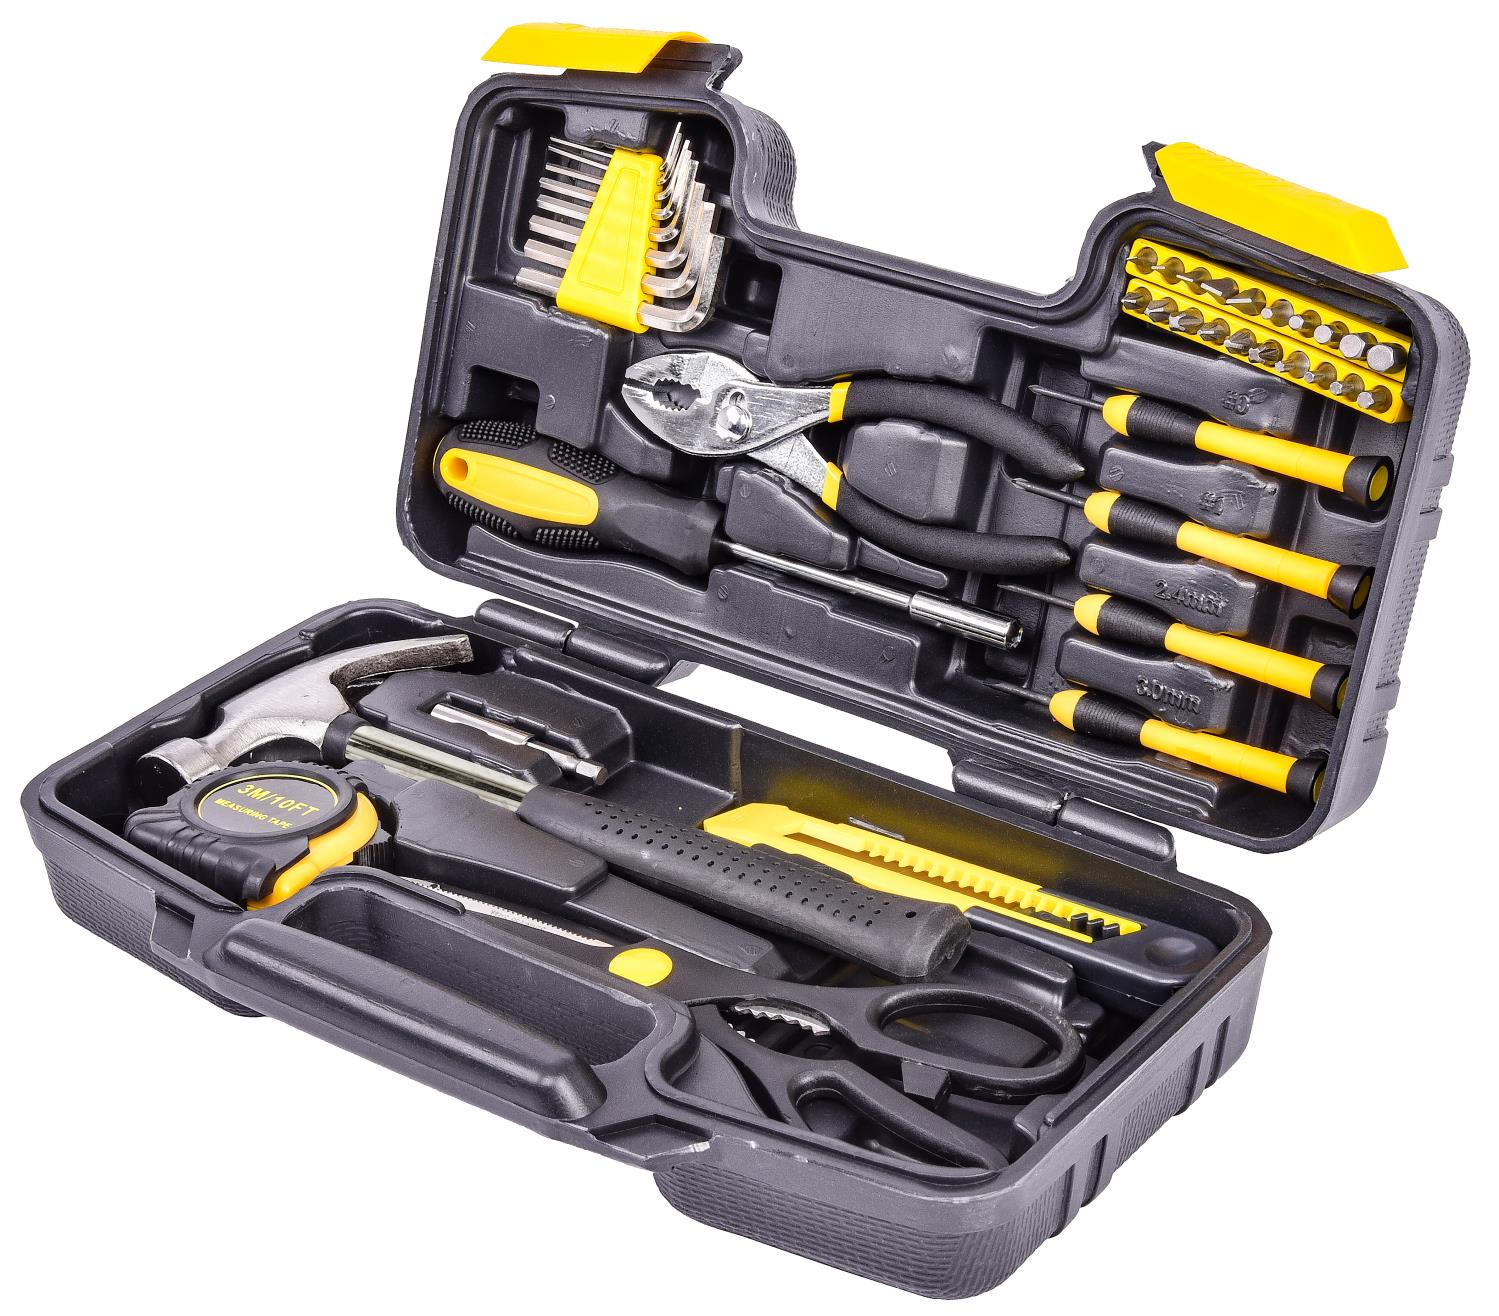 39-Piece Home Tool Set with Carry Case